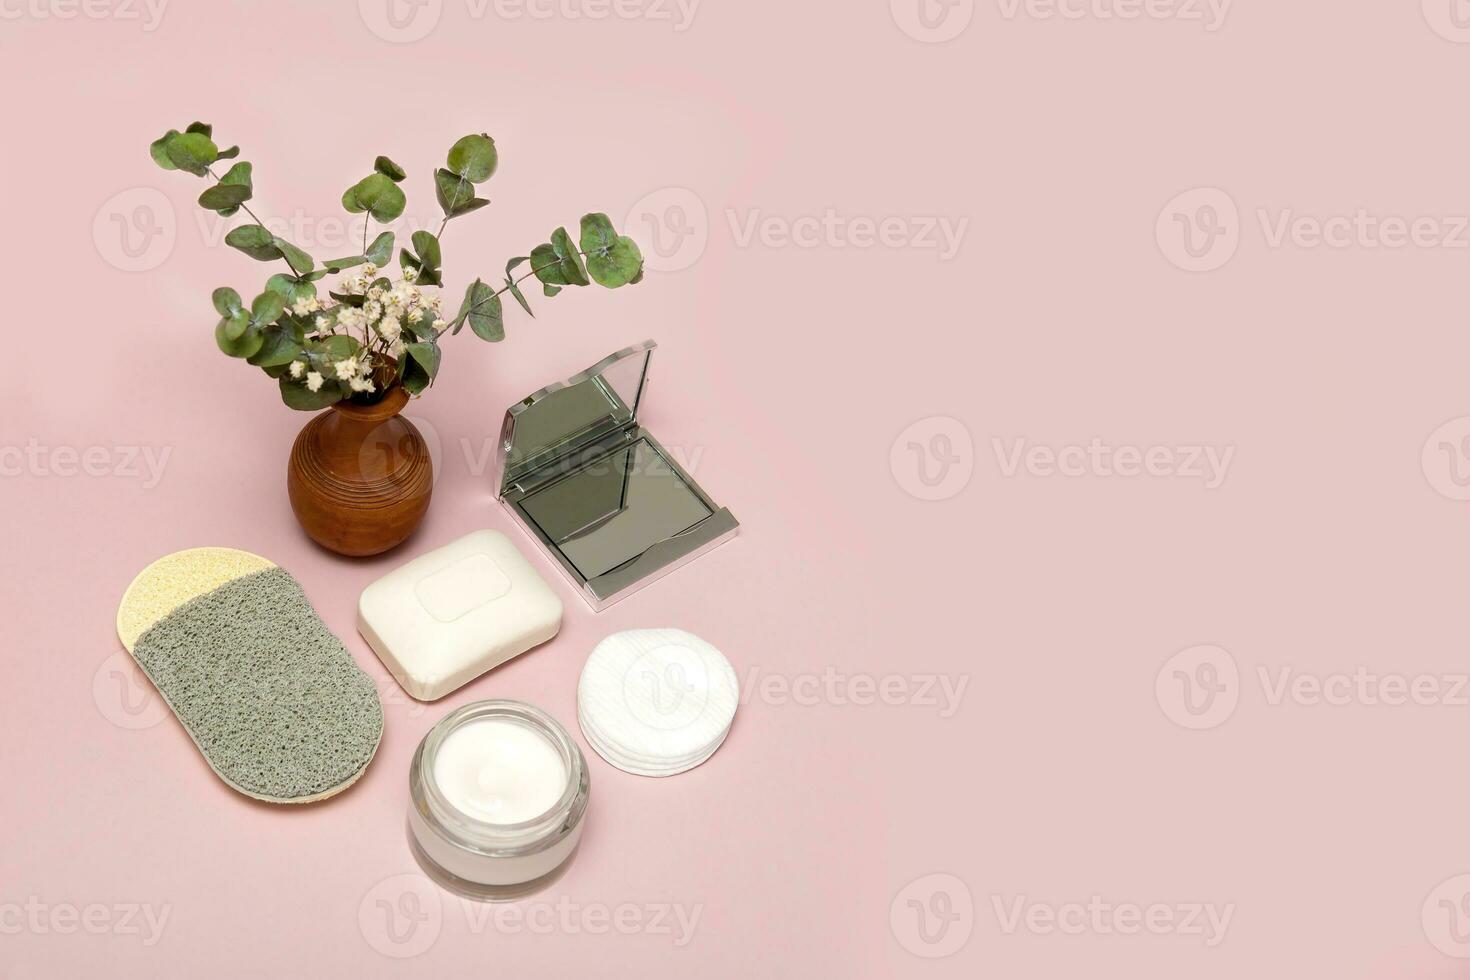 cosmetic accessories face sponge, soap, face cream, mirror, cotton pads on a soft pink background with a vase of greenery and copy space photo